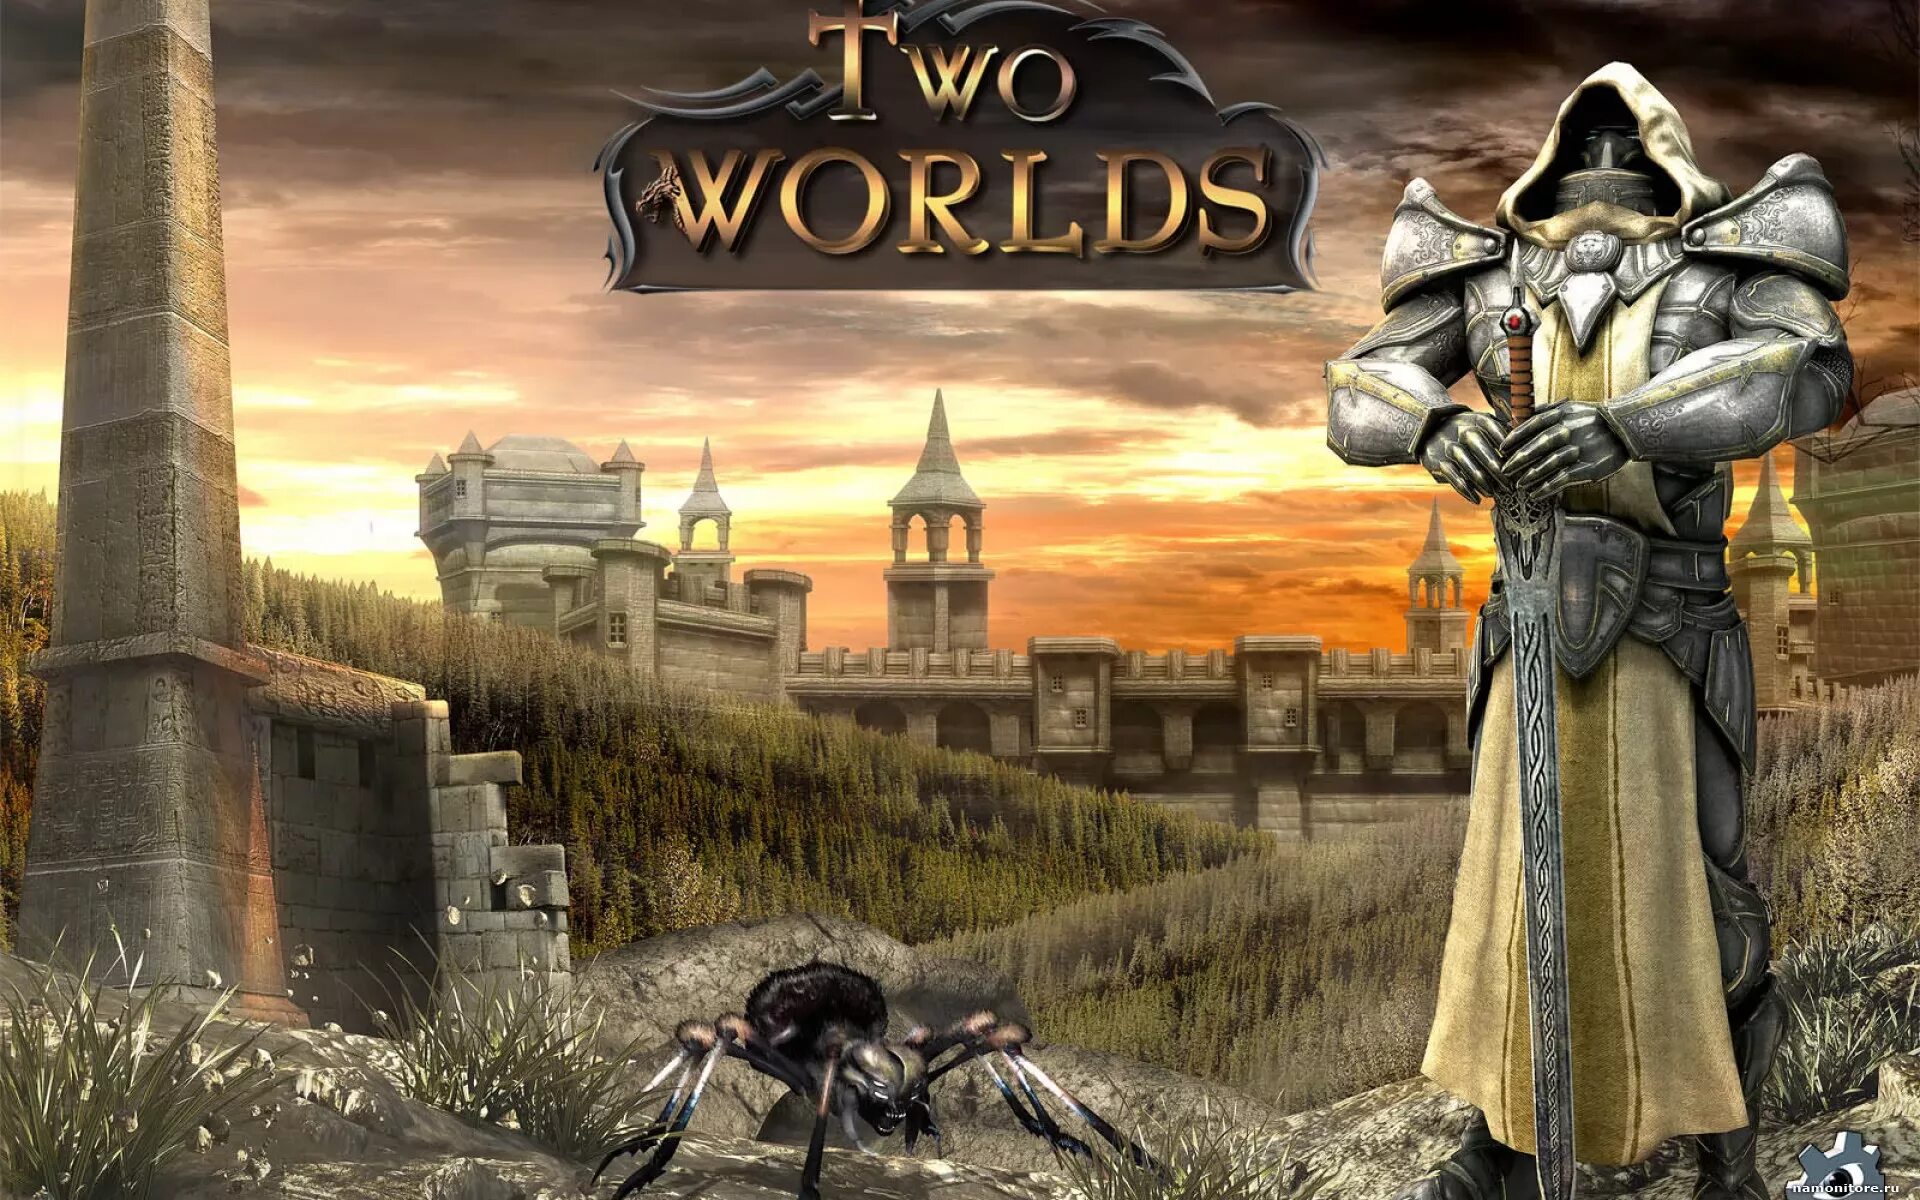 Игра two Worlds Epic Edition. Two Worlds 1 игра. Two Worlds 2 Epic Edition. Two Worlds Epic Edition обложка. Two world epic